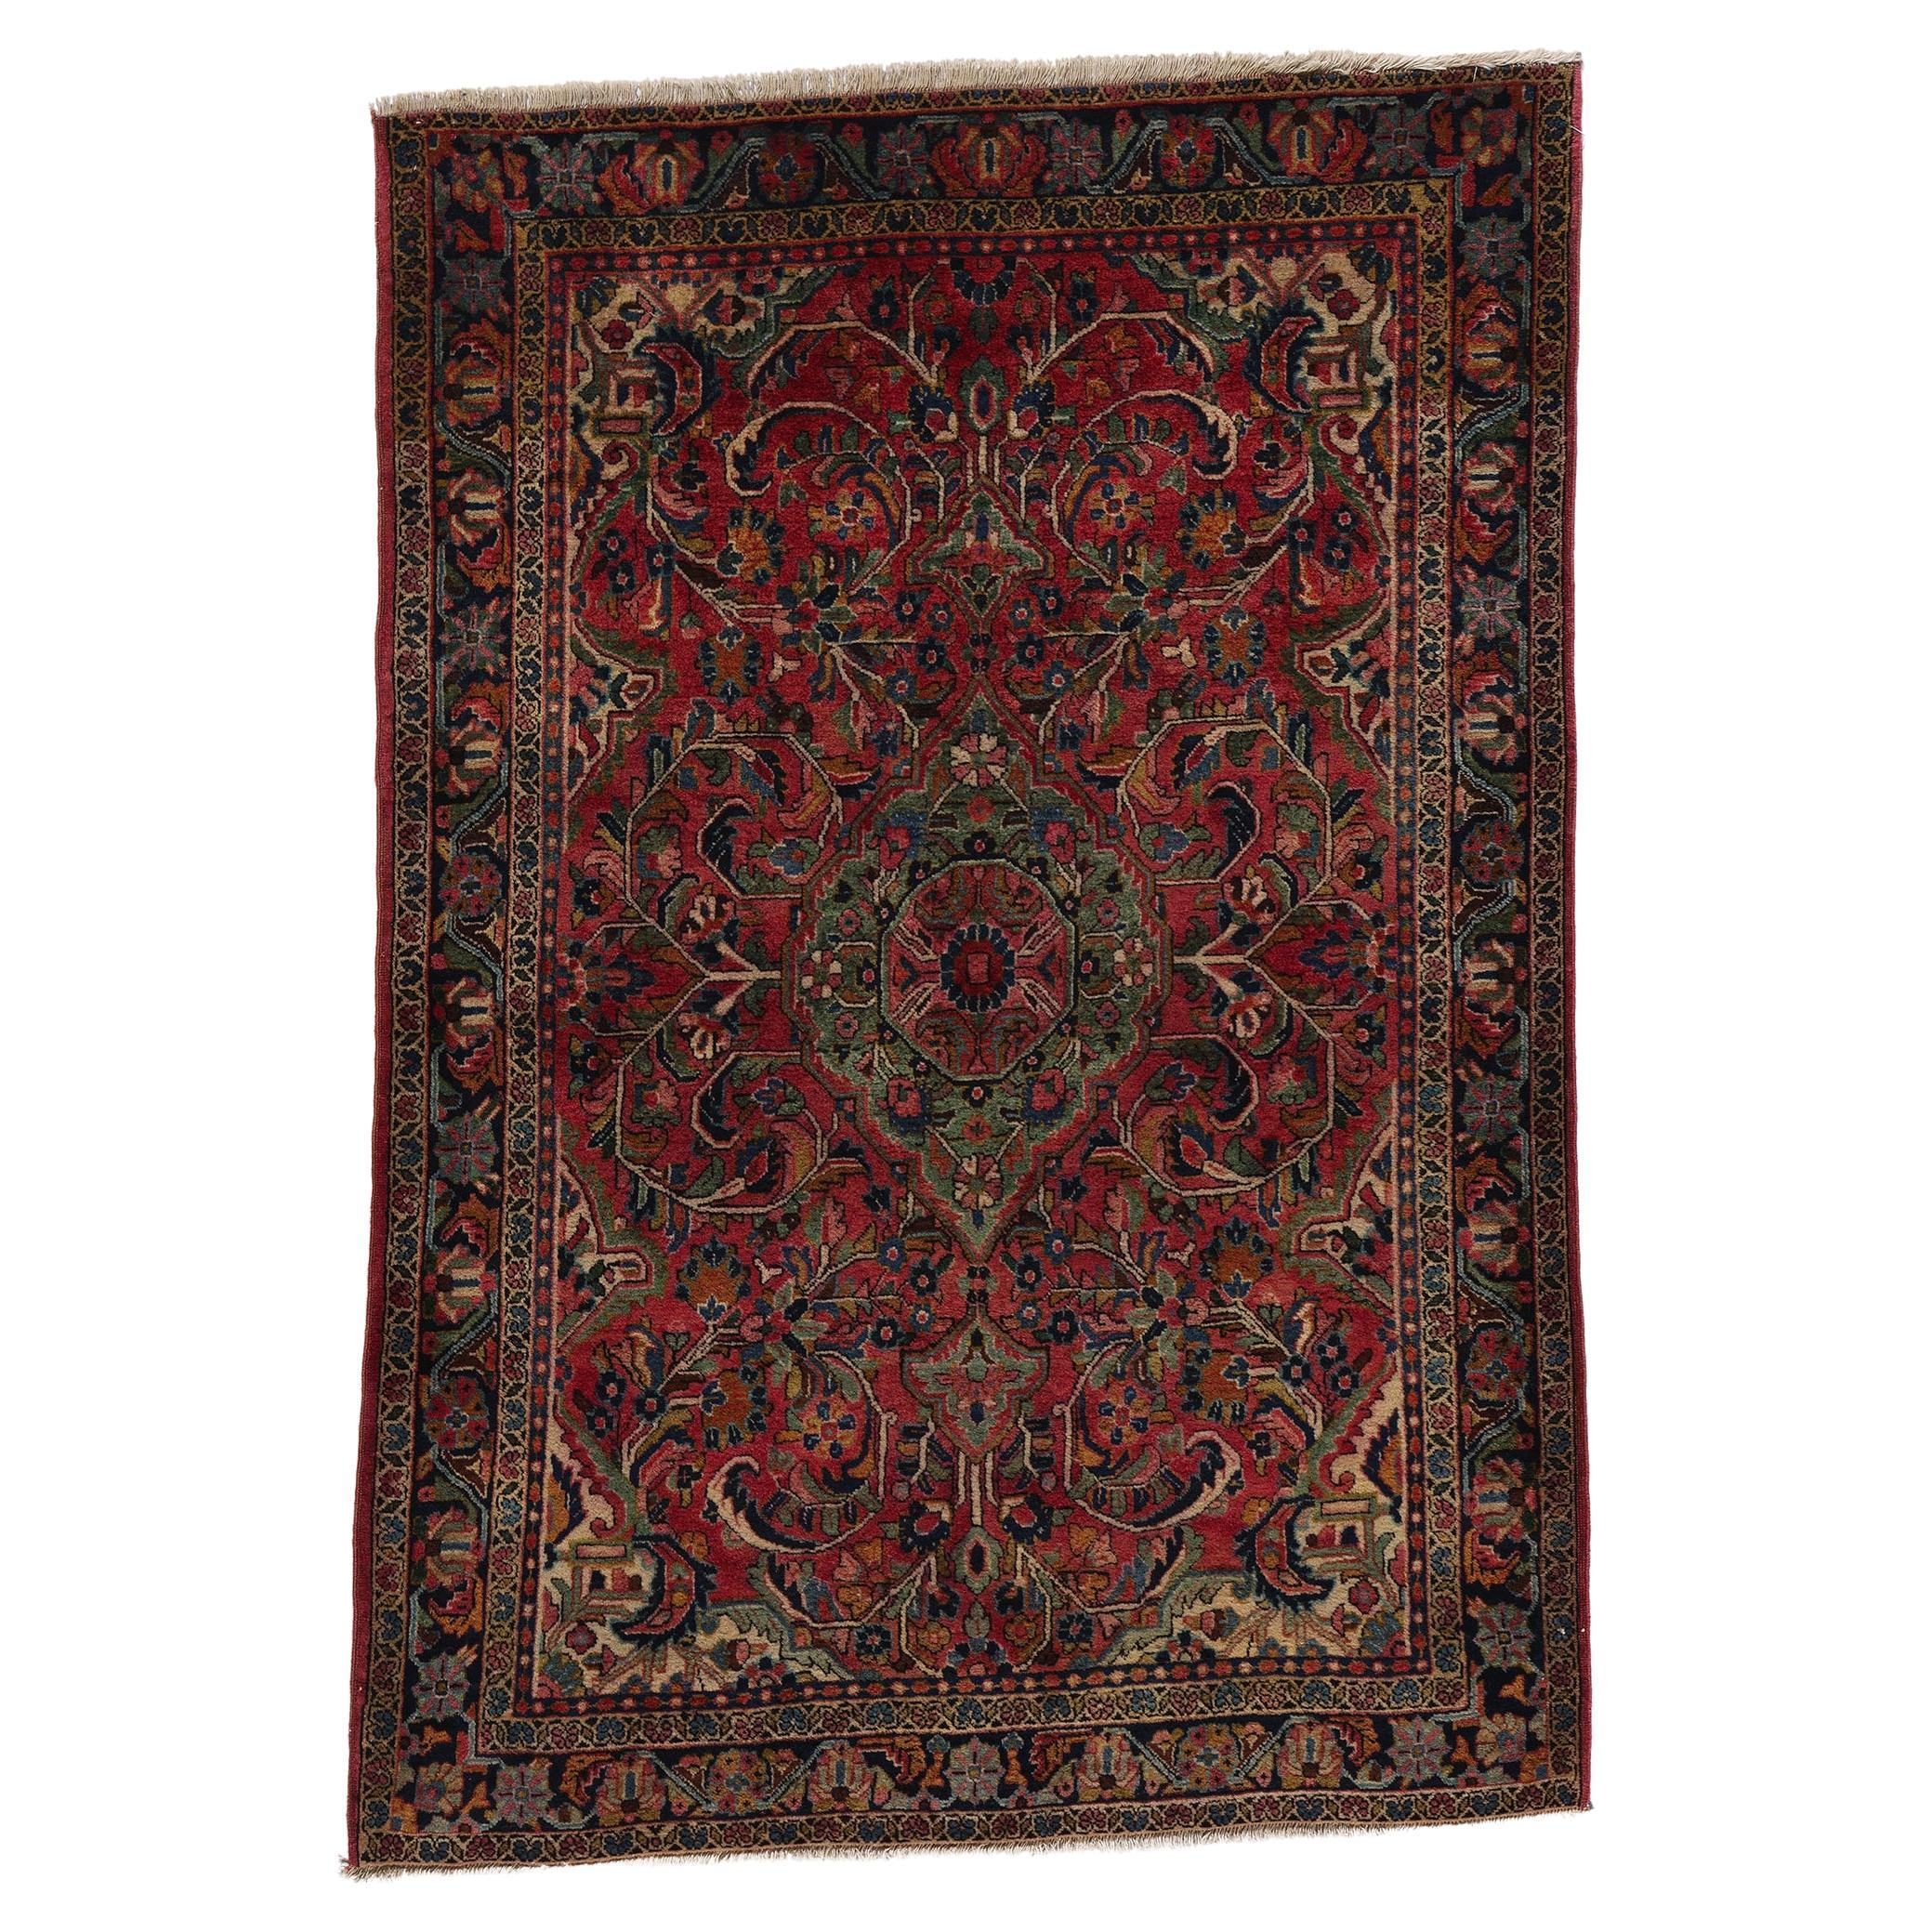 1920s Antique Red Persian Farahan Sarouk Wool Rug with Timeless Elegance For Sale